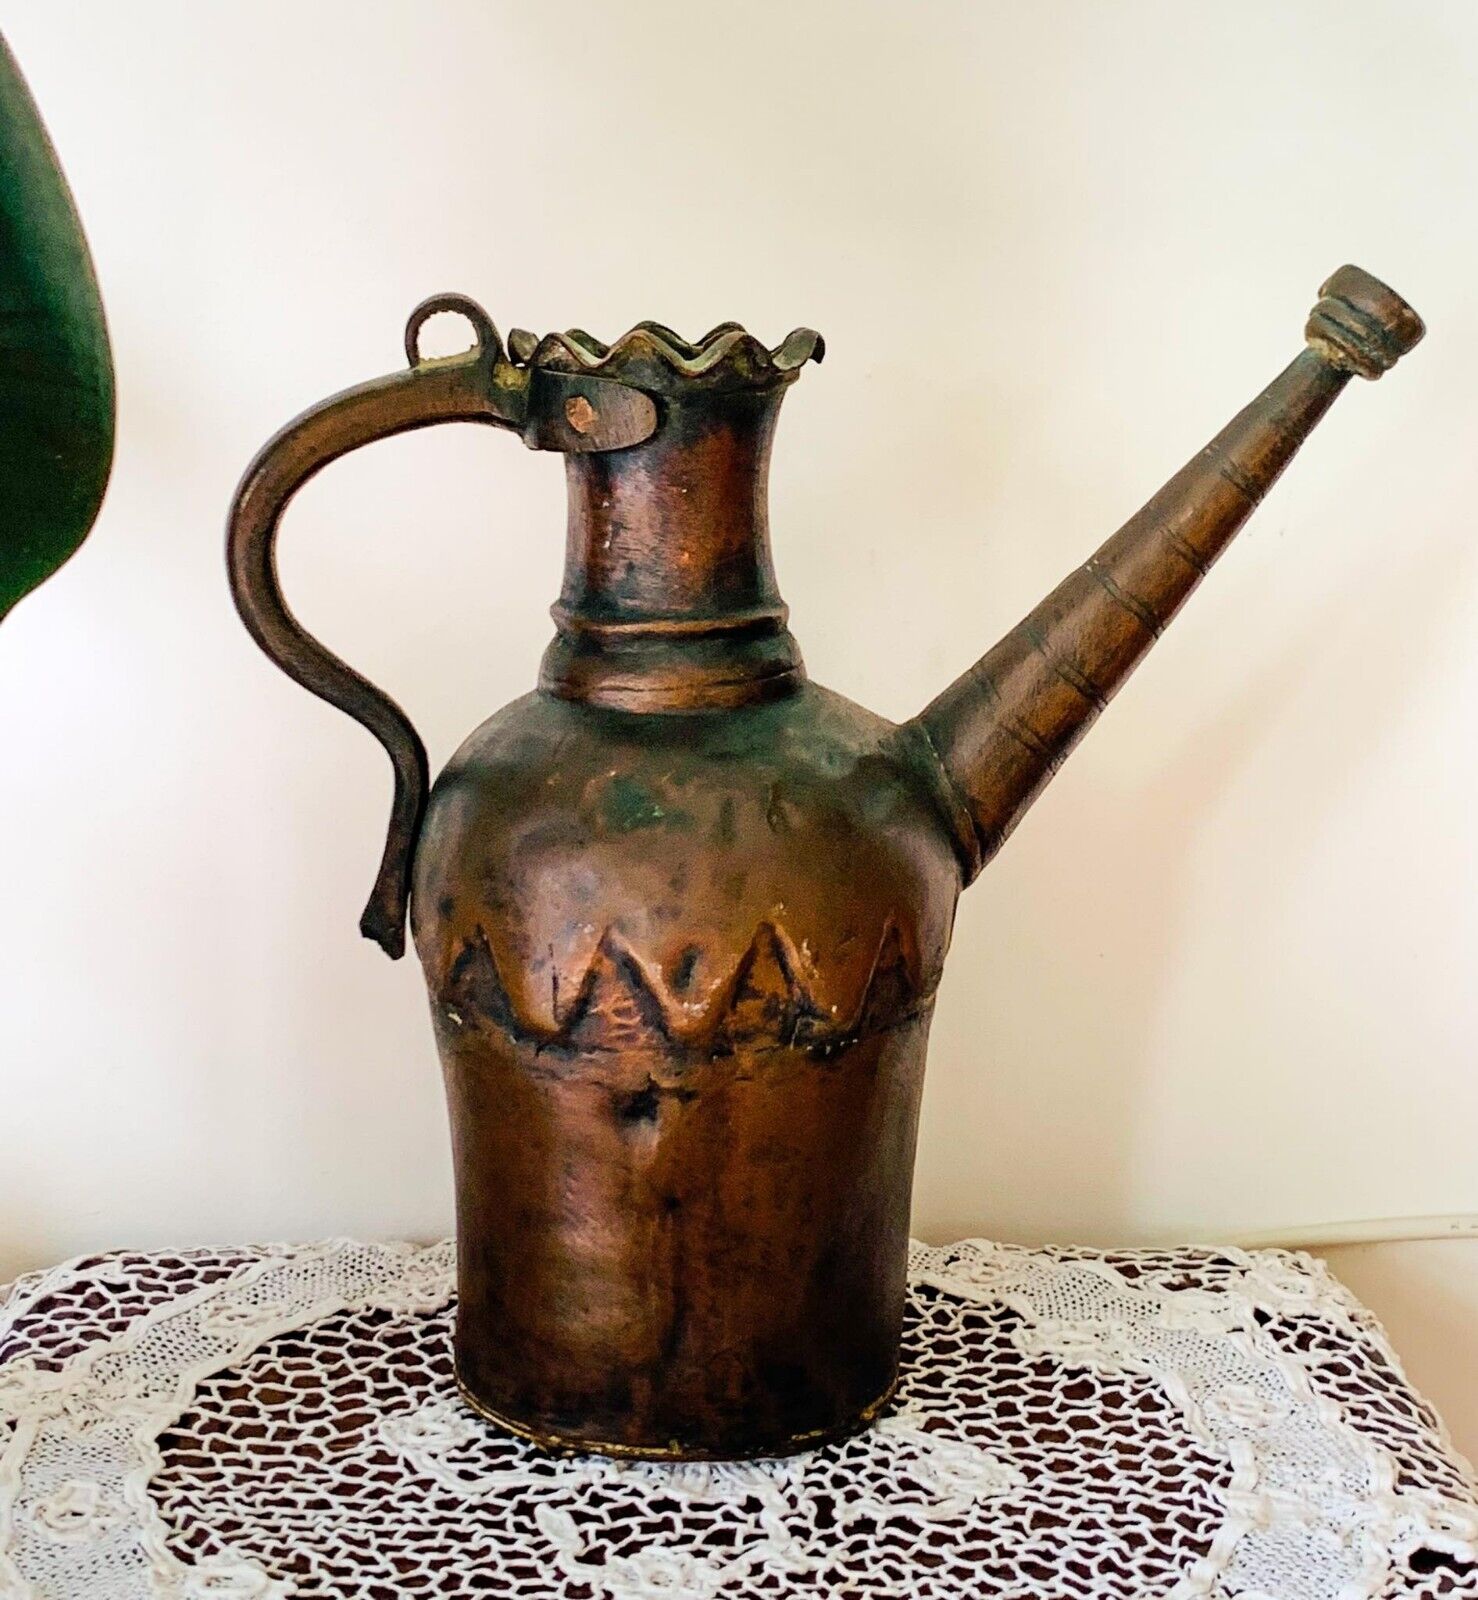 Big Etched Jug Antique Handmade Red Copper Handle Middle East Decor Collectibles